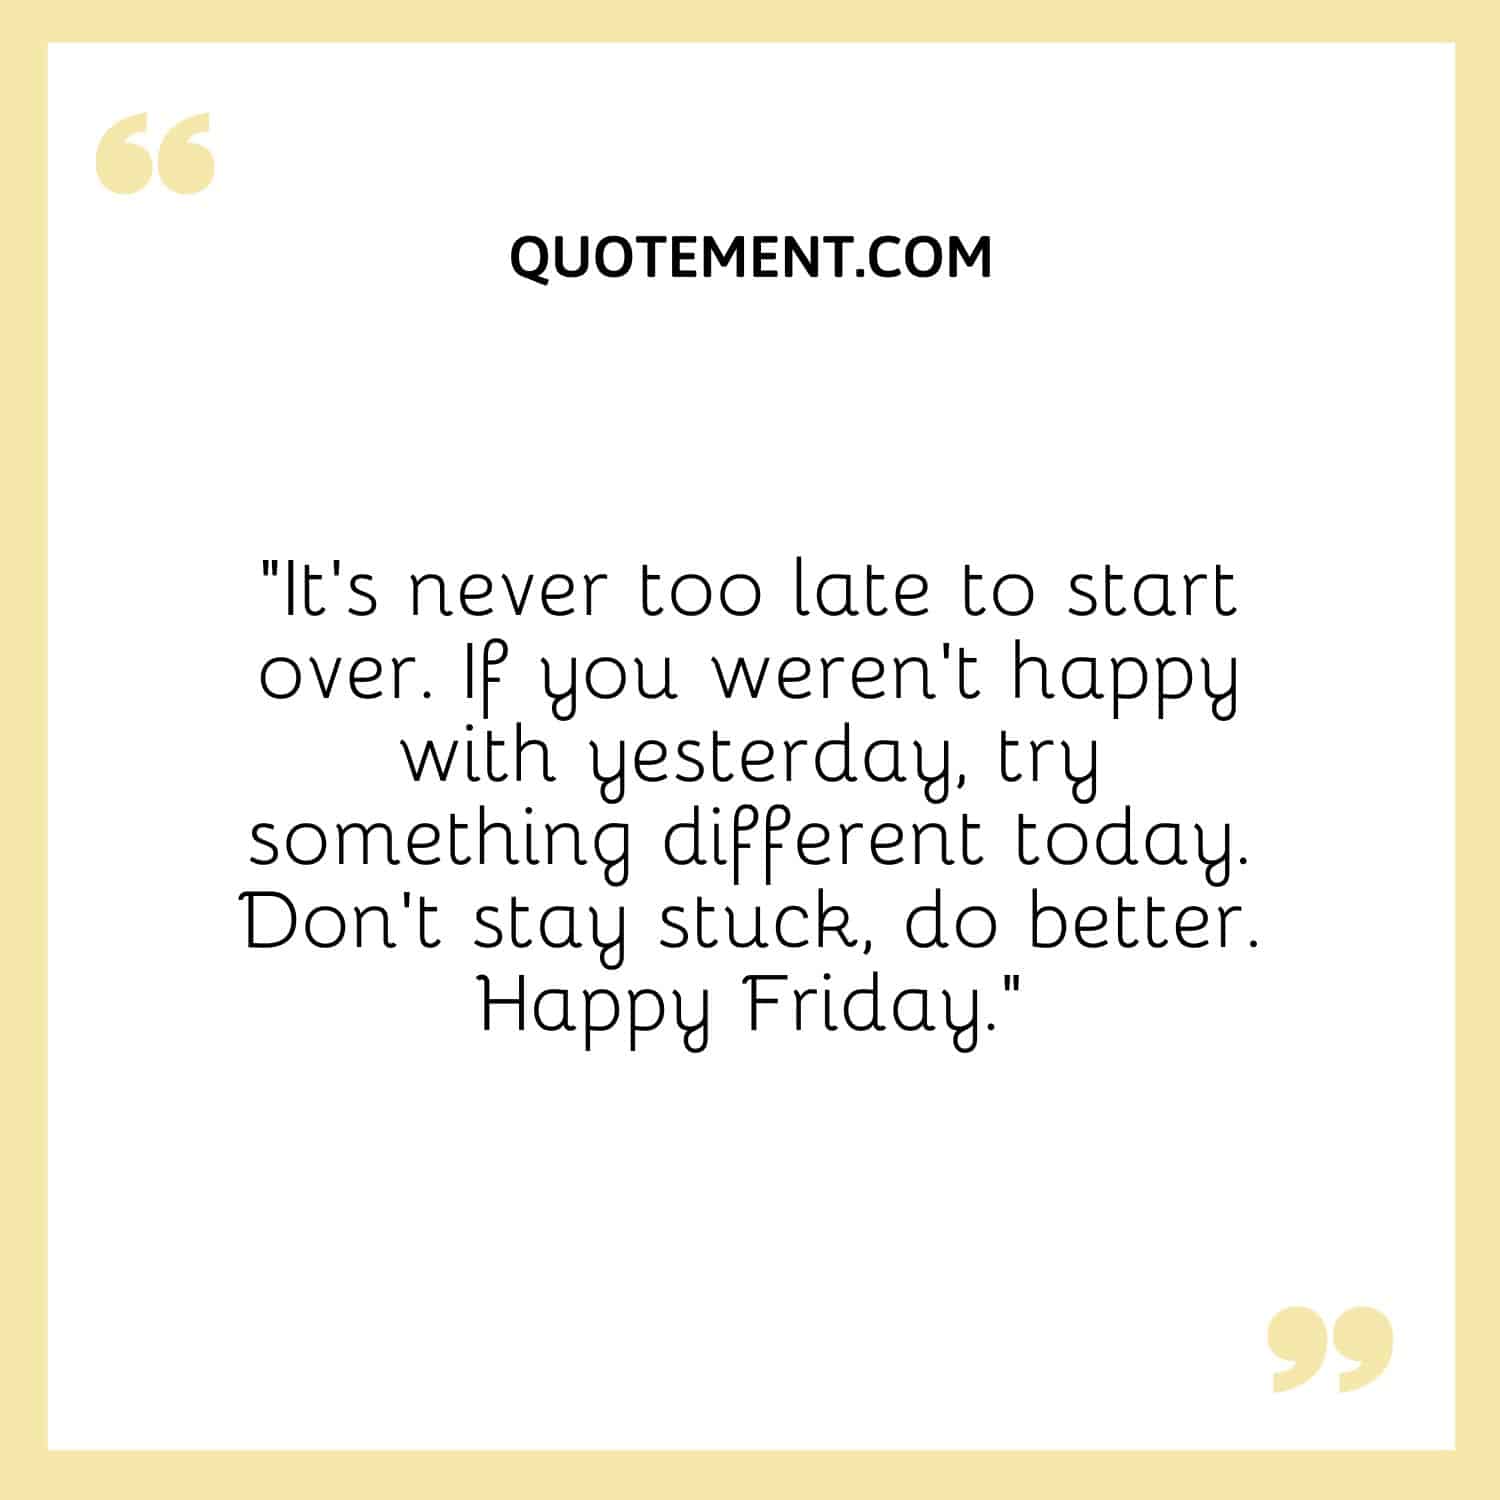 It’s never too late to start over